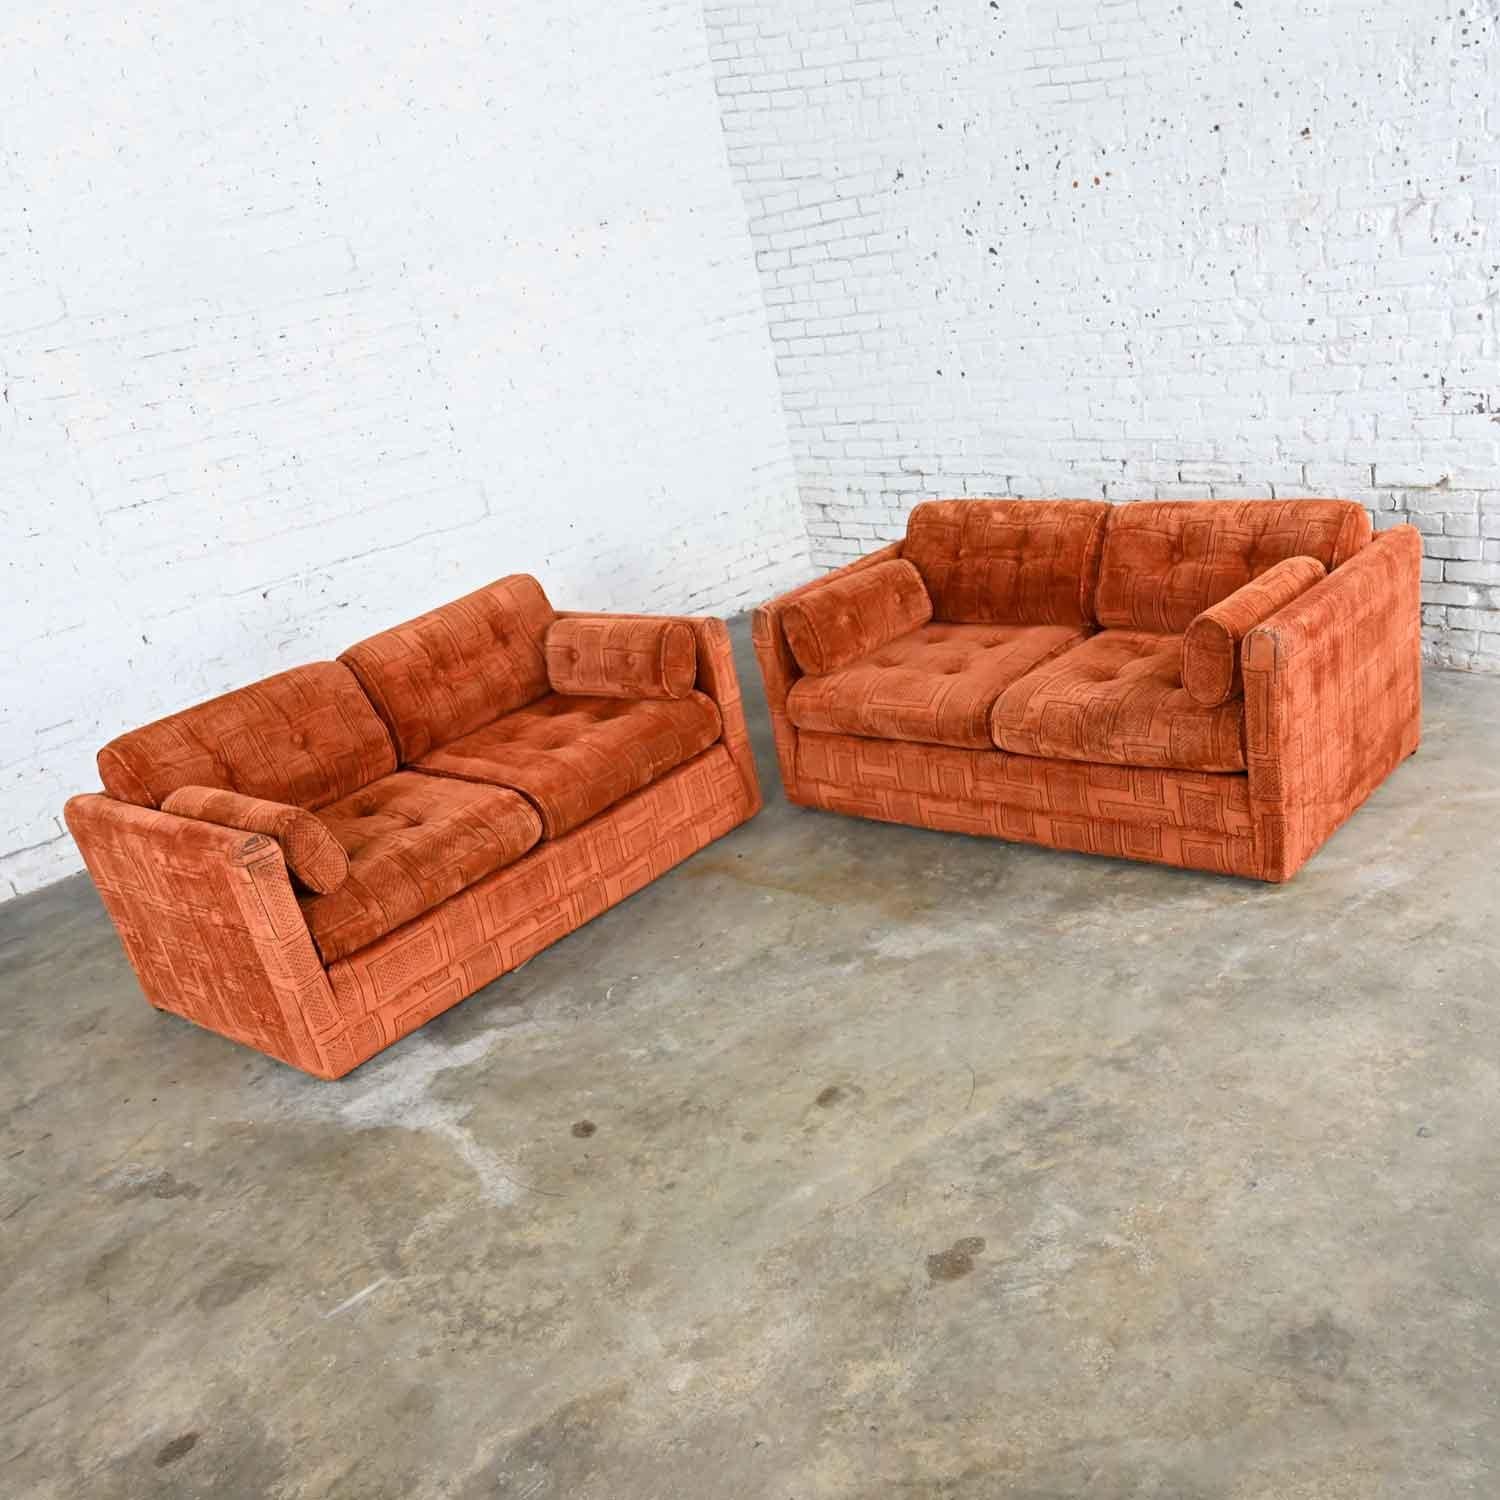 Handsome pair of modern tuxedo style rust color geometric textured chenille fabric upholstered love seats by Pem-Kay Furniture Co. Beautiful condition; but remember, these are vintage and not new so will have signs of use. The fabric has worn a bit